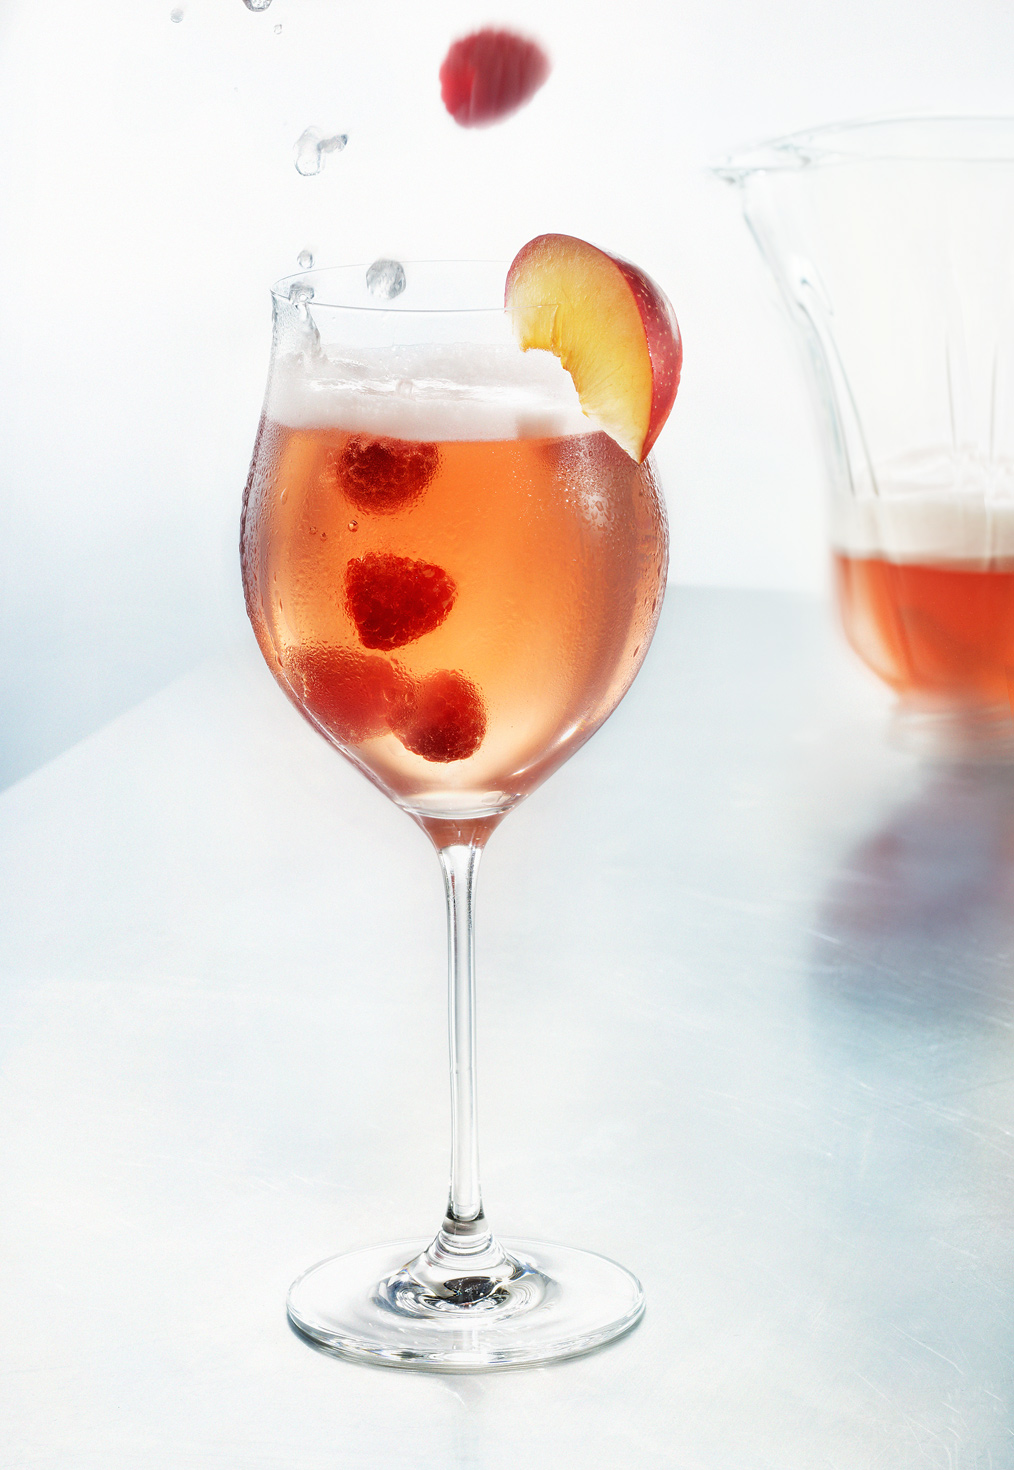 Glasshouse Assignment - David Bishop - Beverage Photography - Raspberry Cosmo